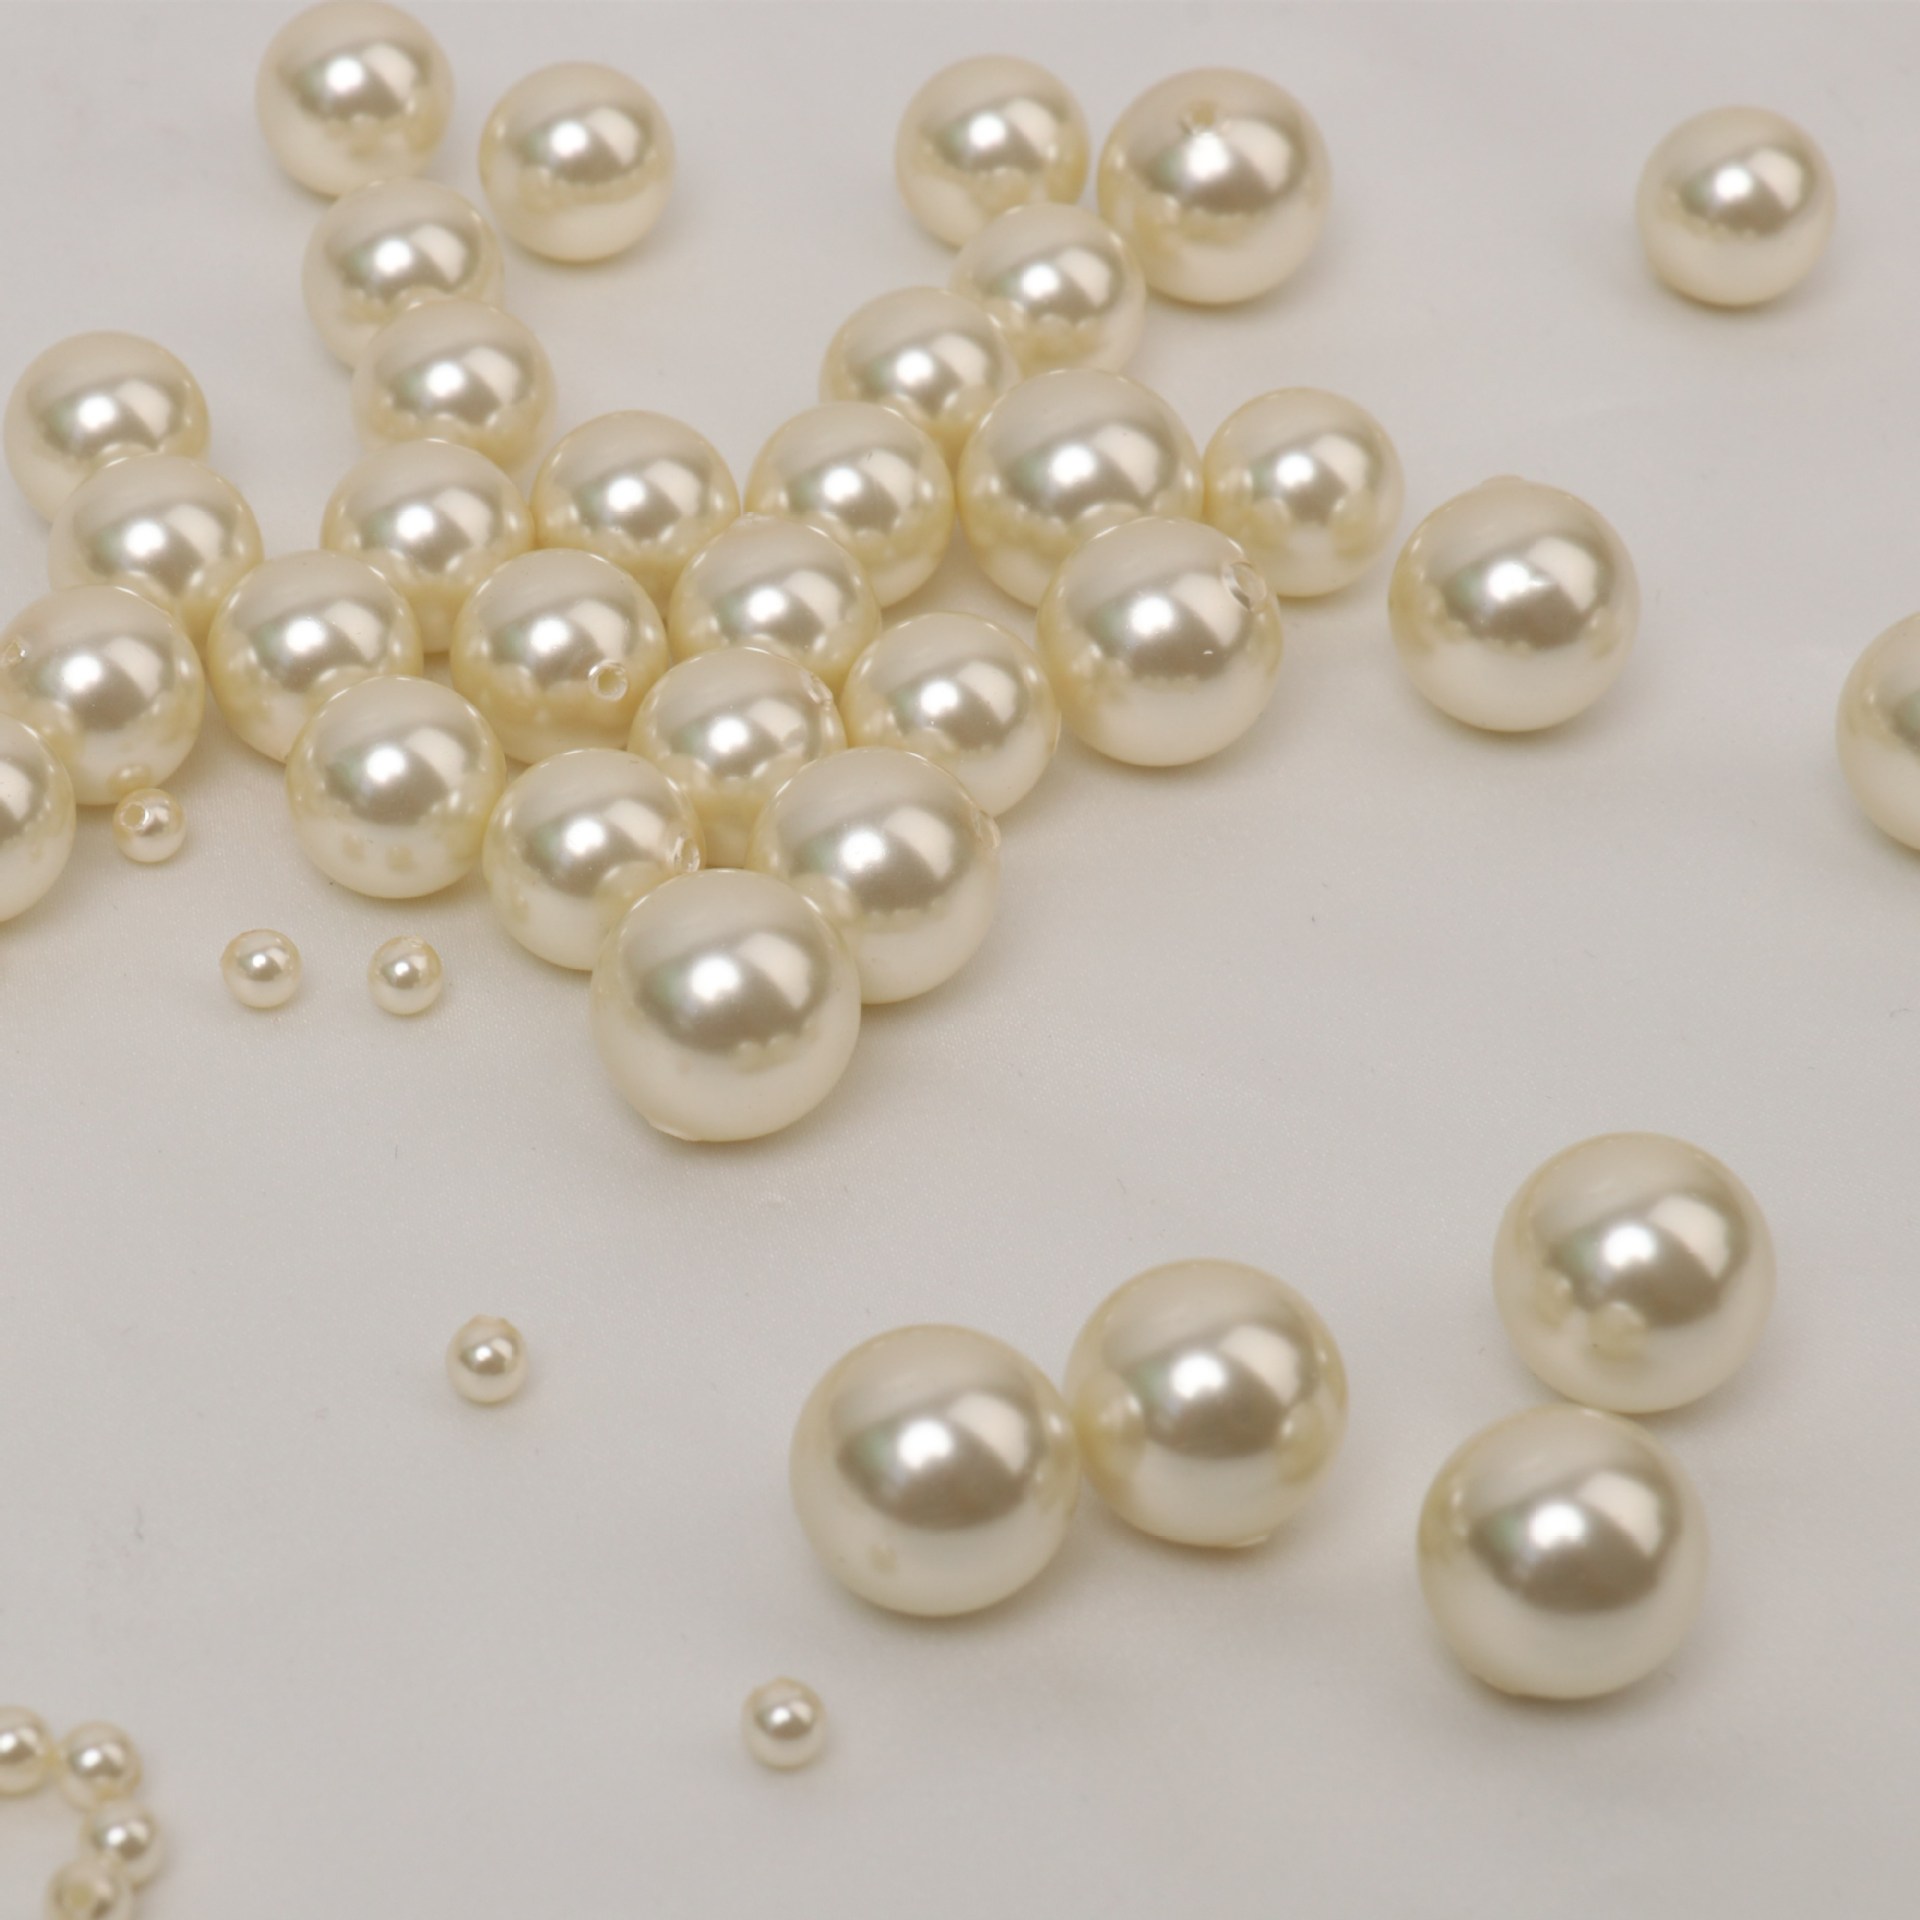 Pearl off-white 12mm